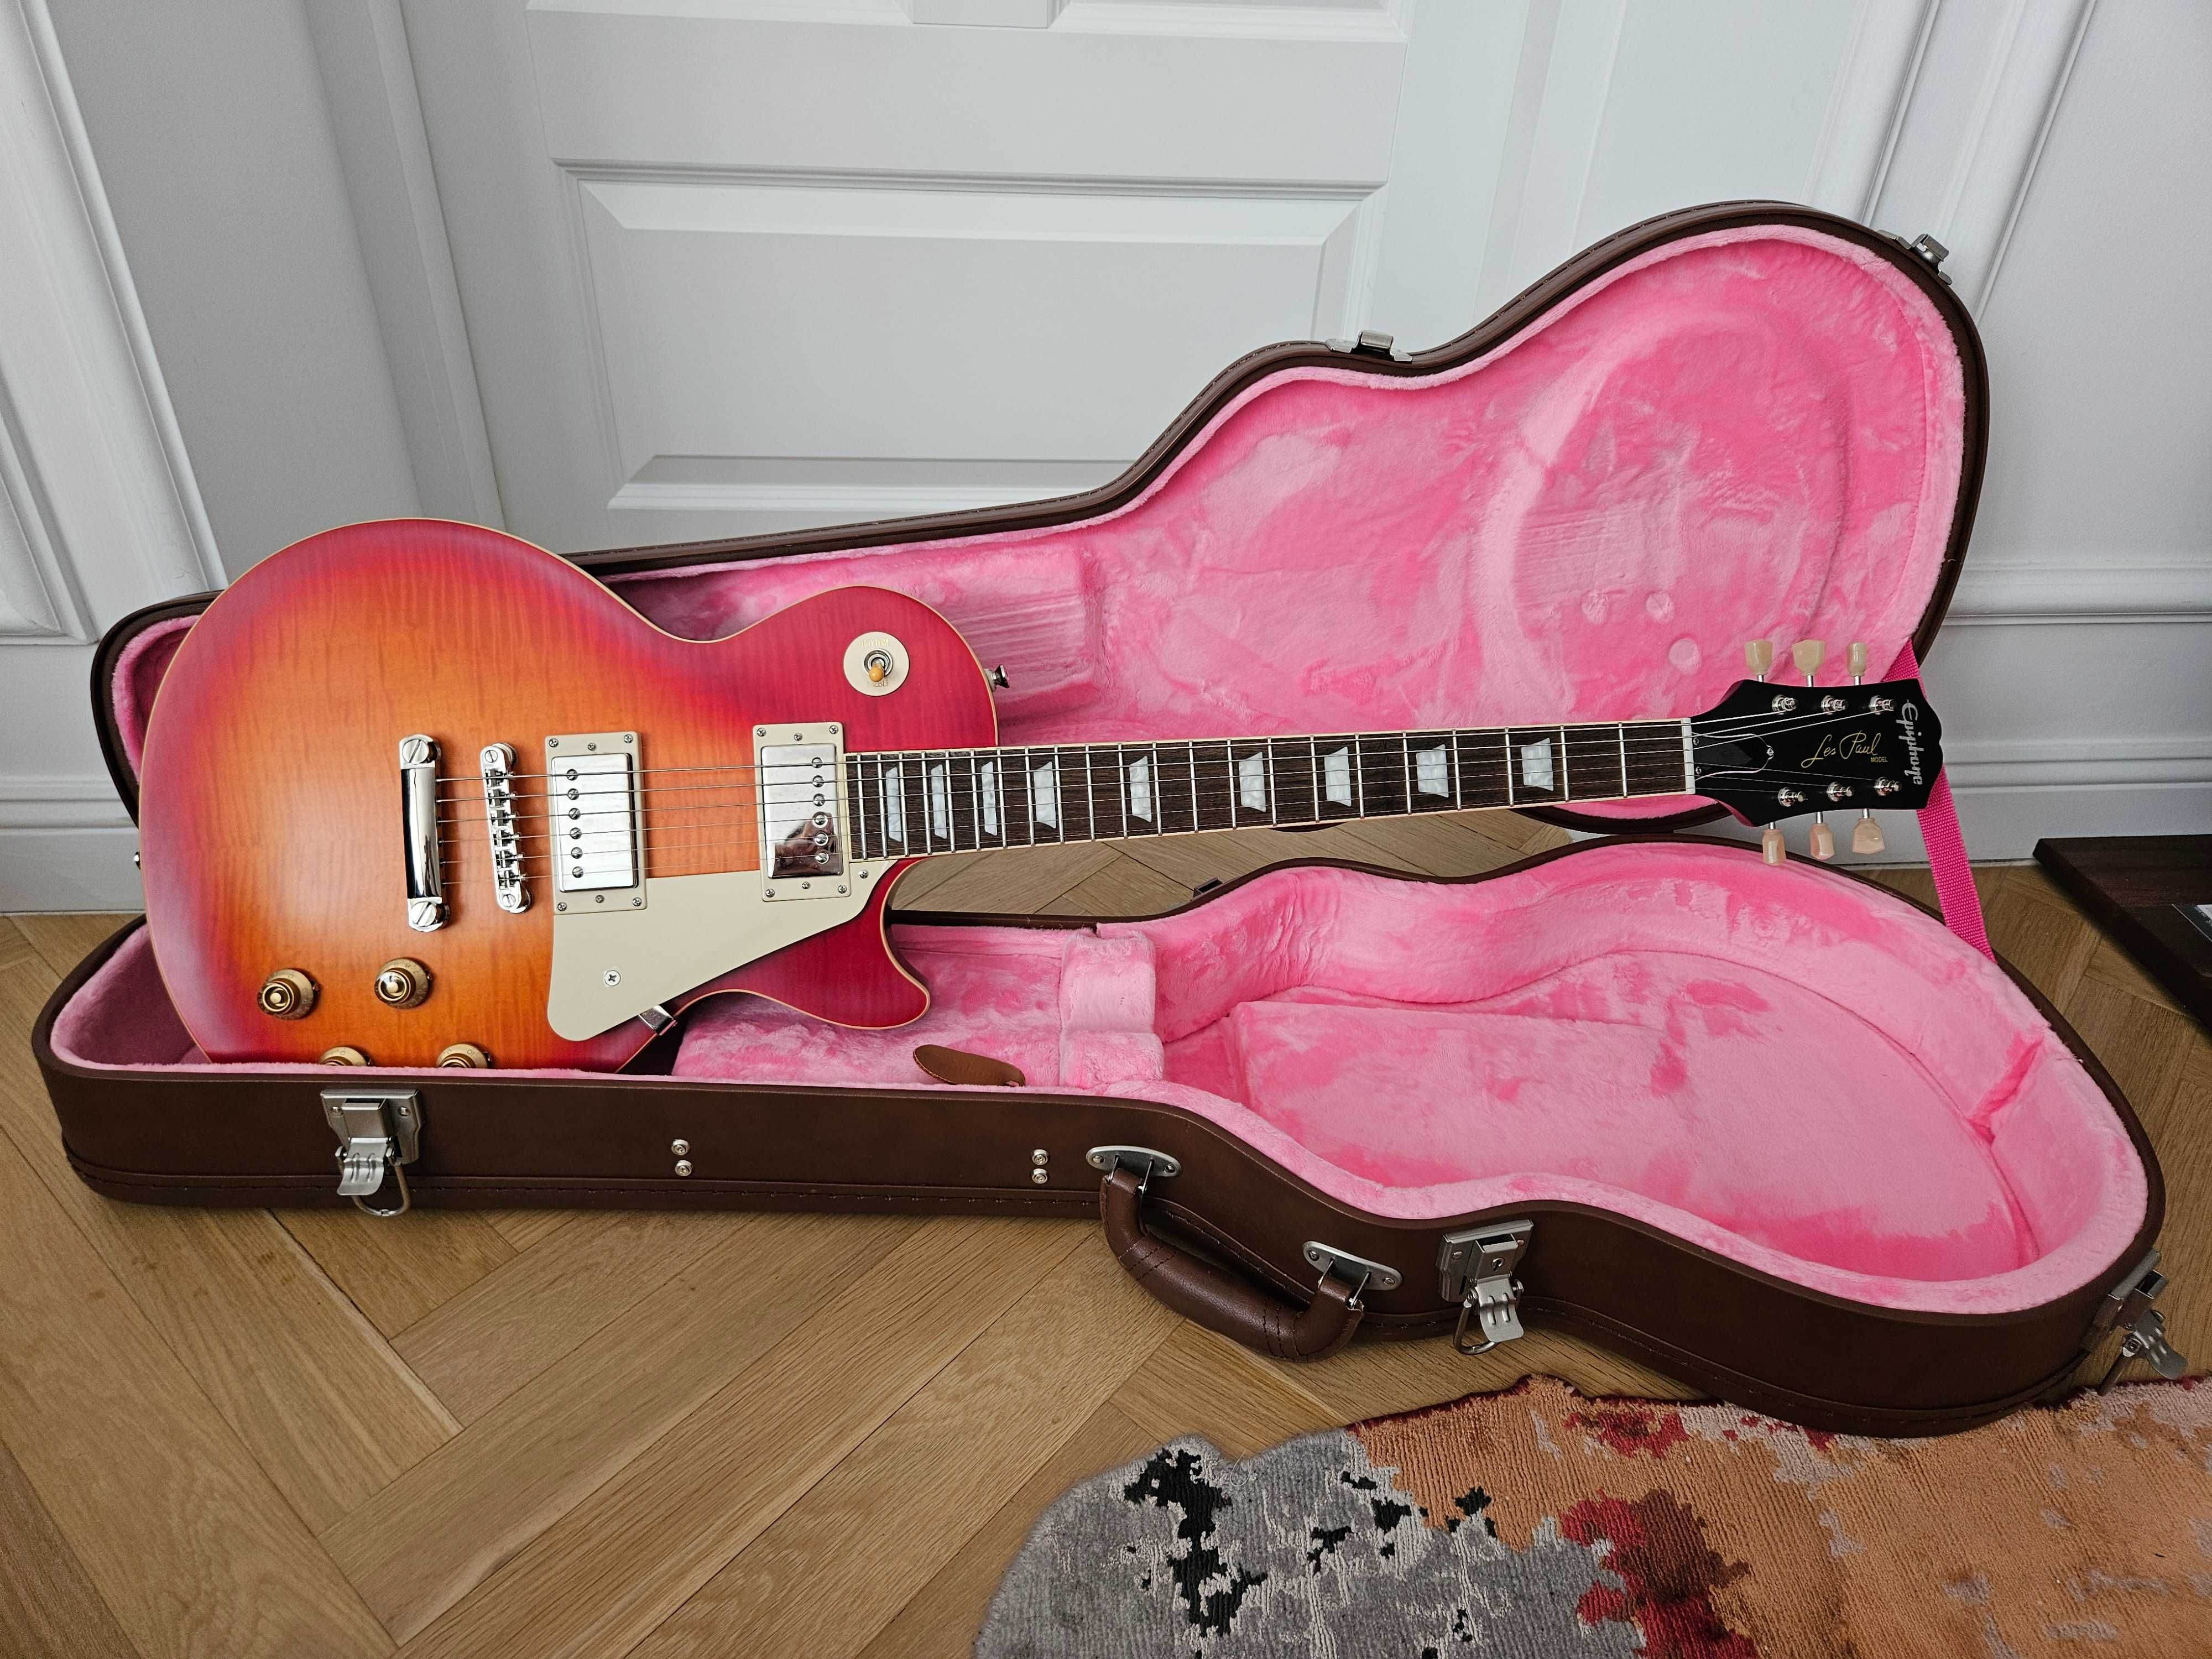 Epiphone Les Paul 1959 standard (inspired by Gibson)